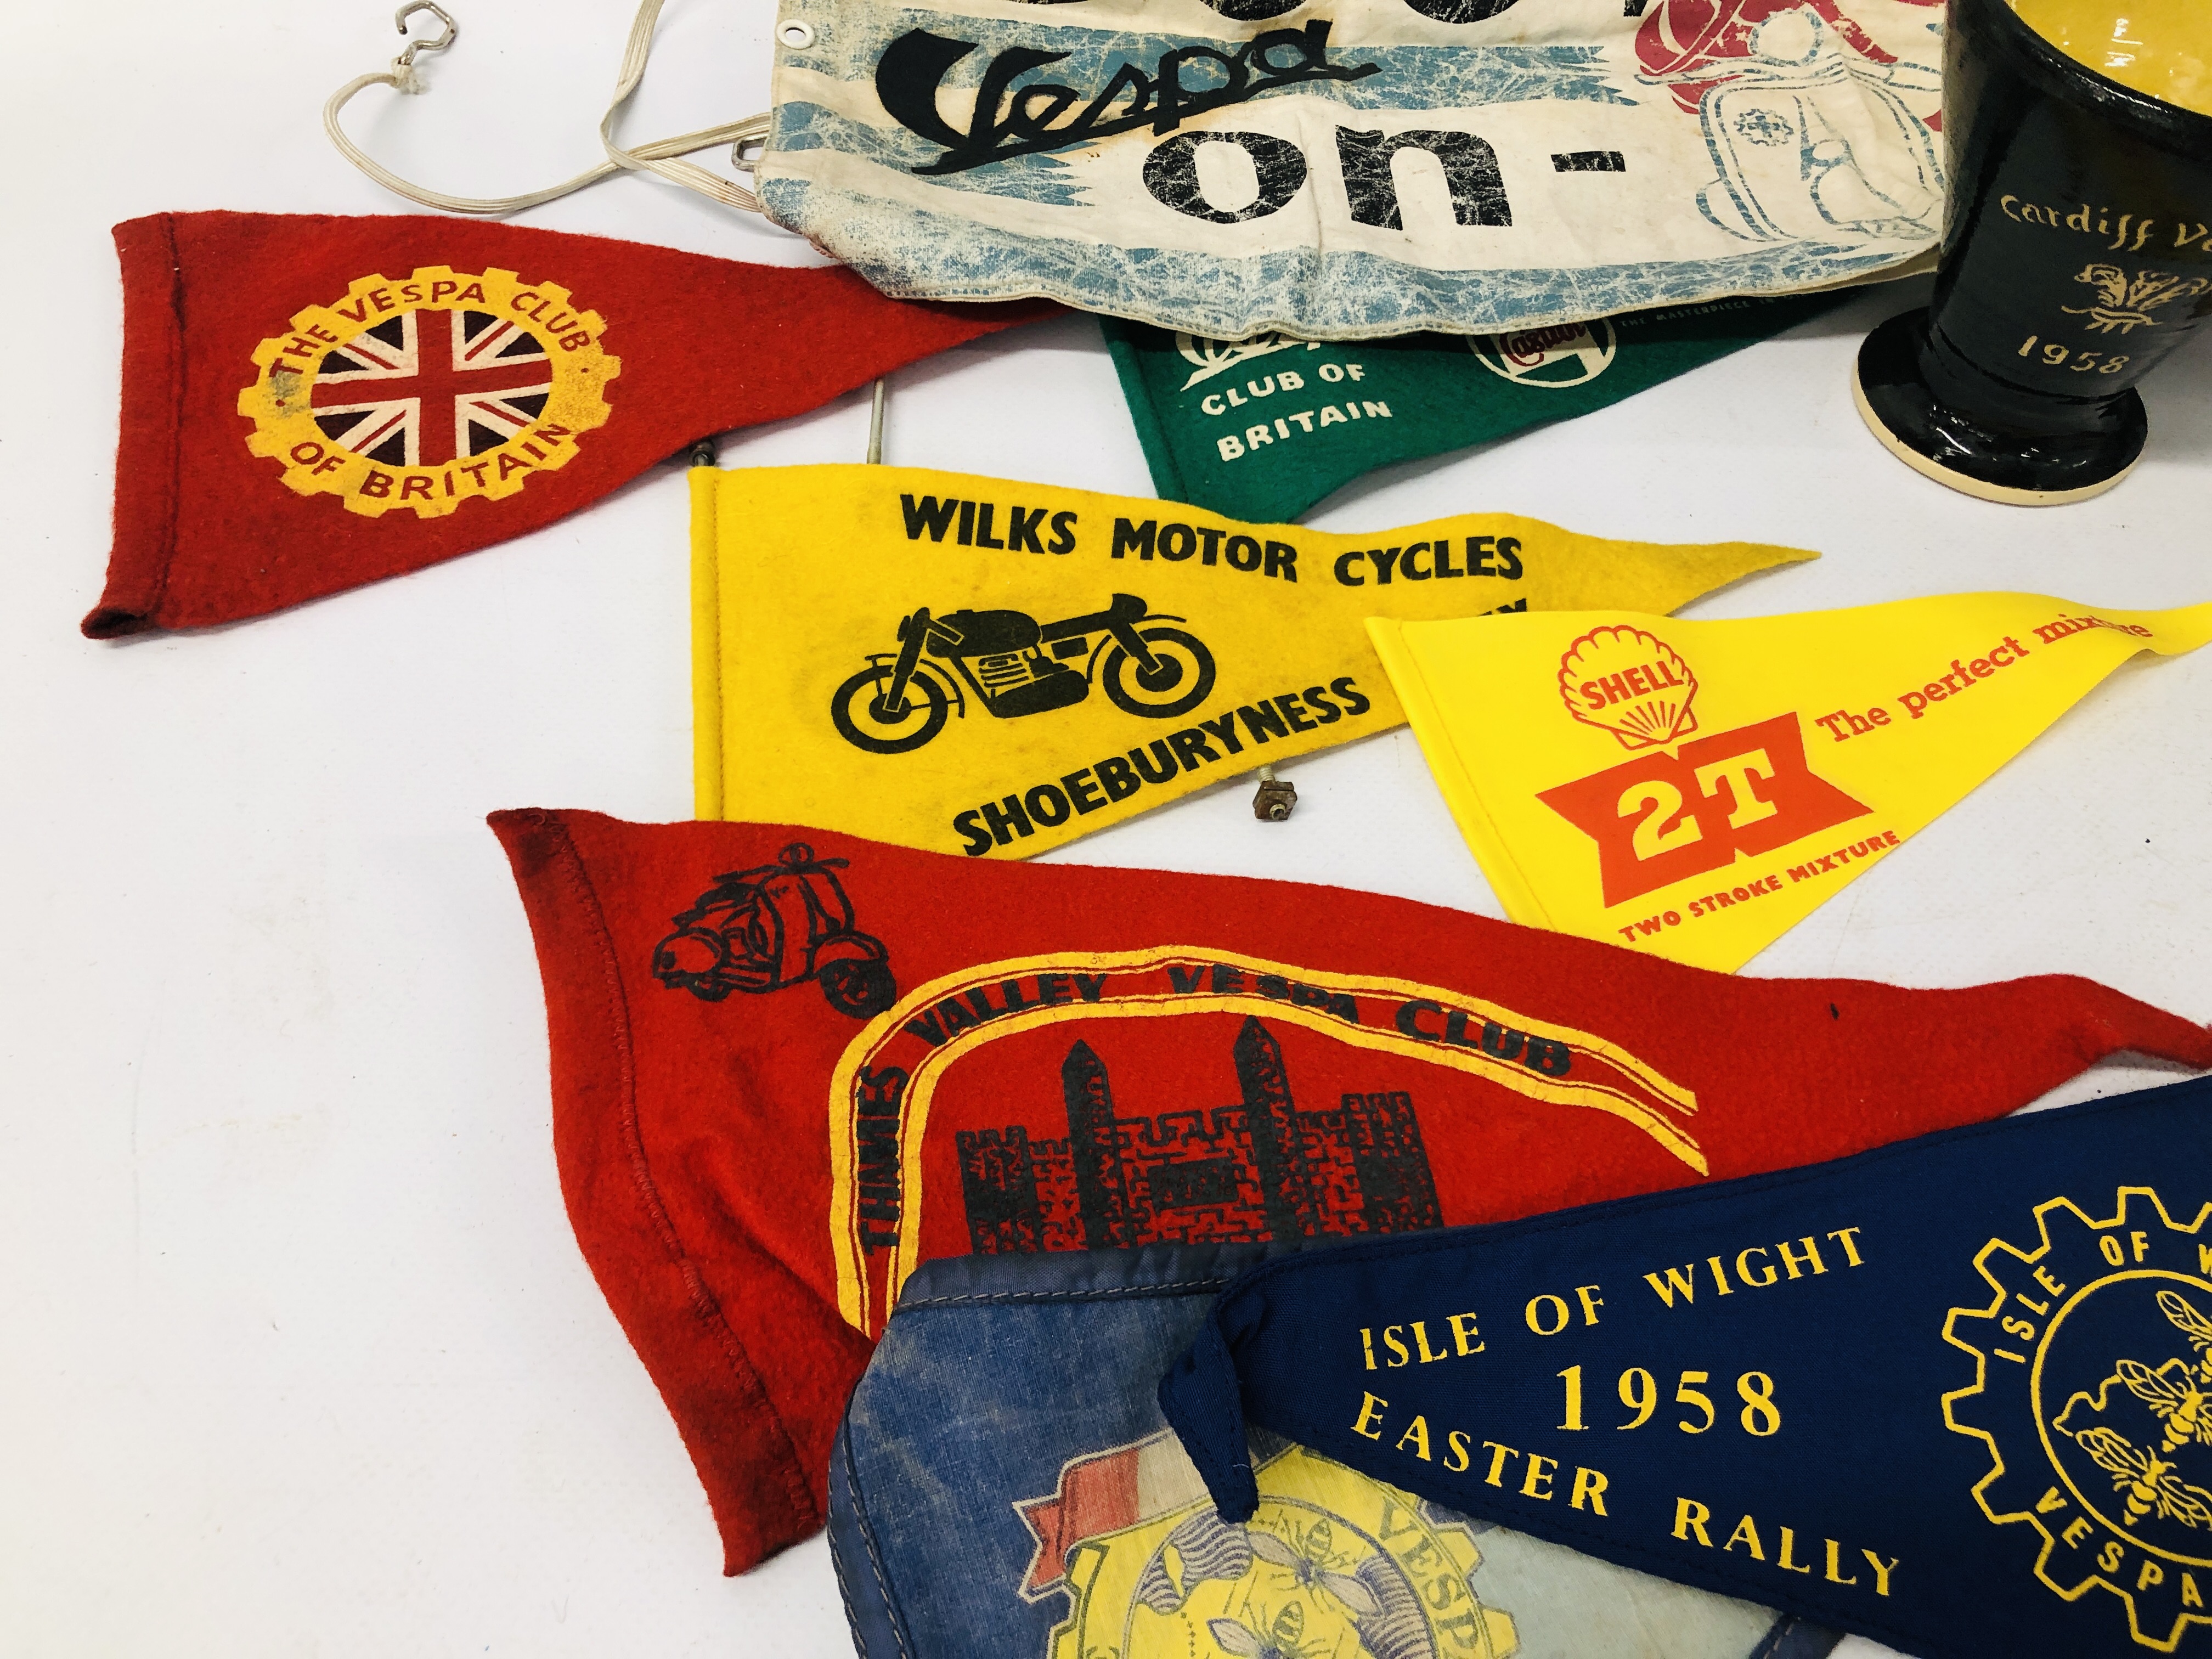 c1950s VESPA SCOOTER CLUB BADGES, PENNANTS, STICKERS, SOUTHEND ON SEA CLUB BANNER, - Image 5 of 6